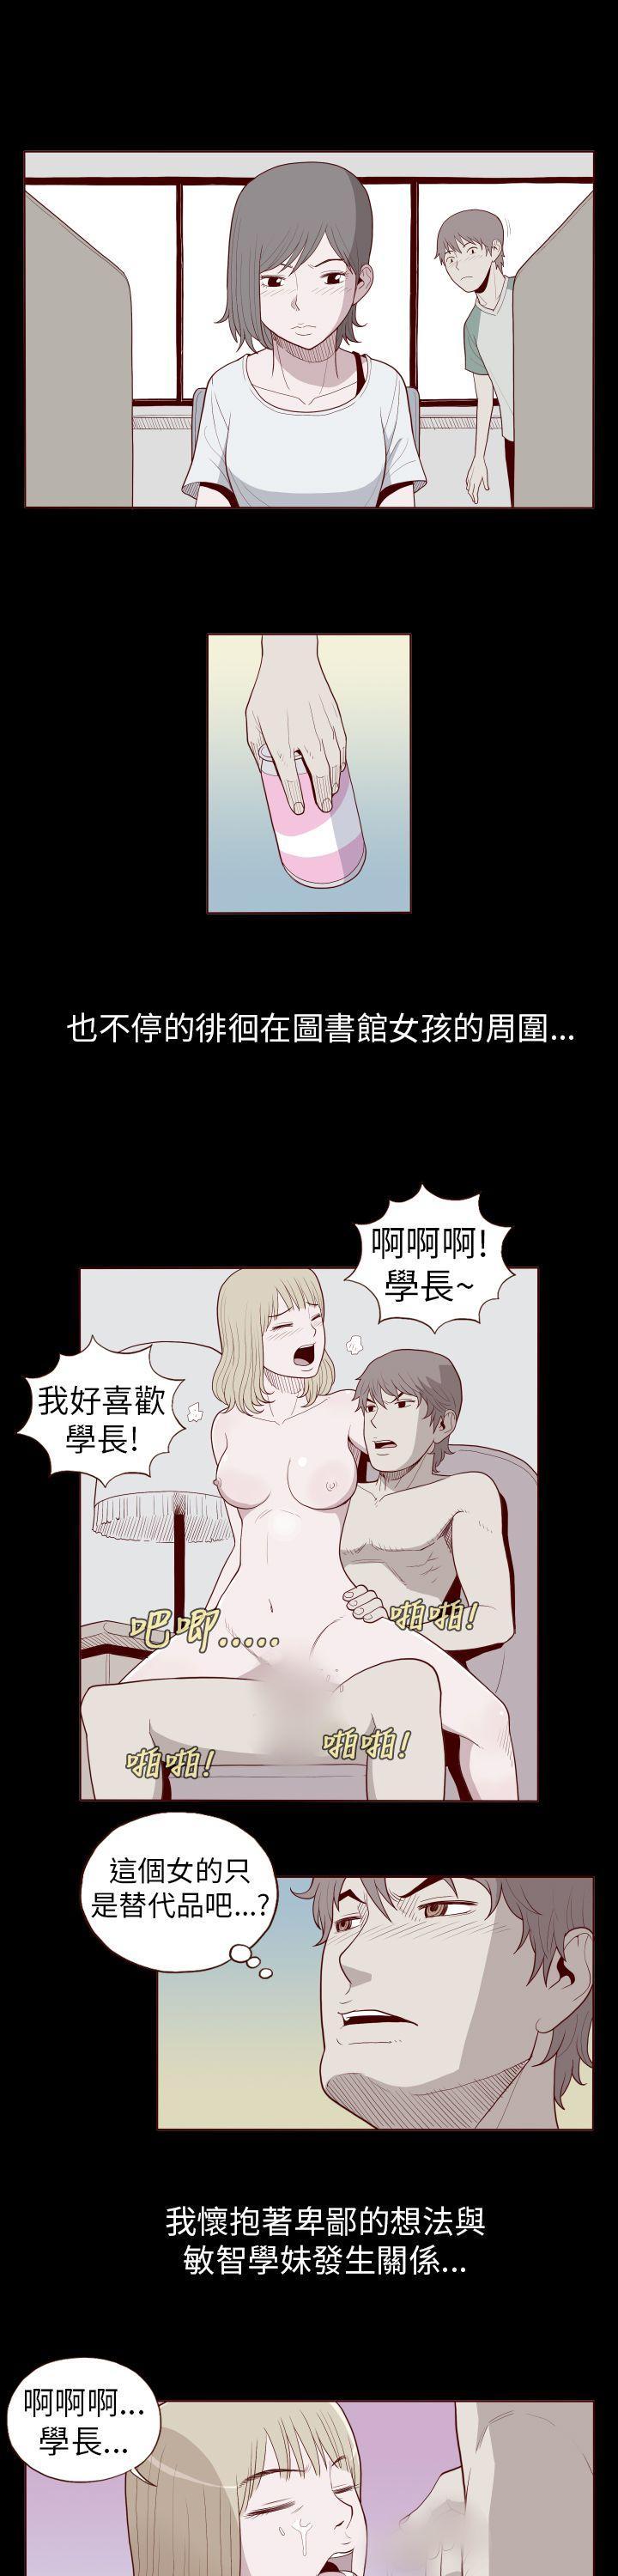 Peeing 淫亂魔鬼 Candid - Page 5